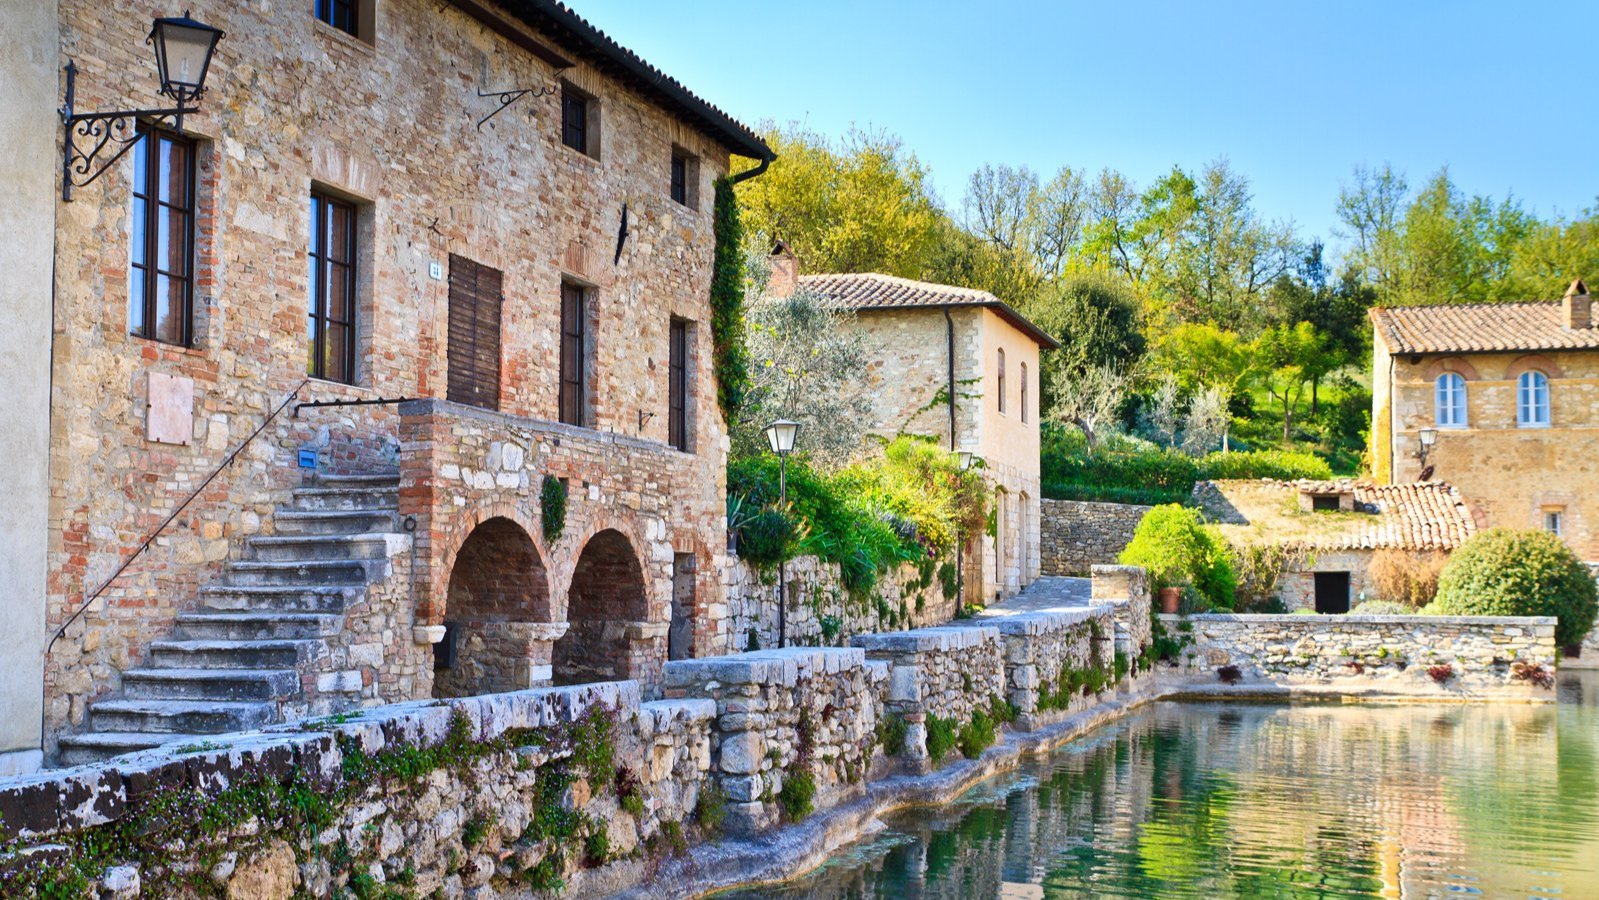 Bagno Vignoni, an ancient Tuscan spa town in the Val d'Orcia